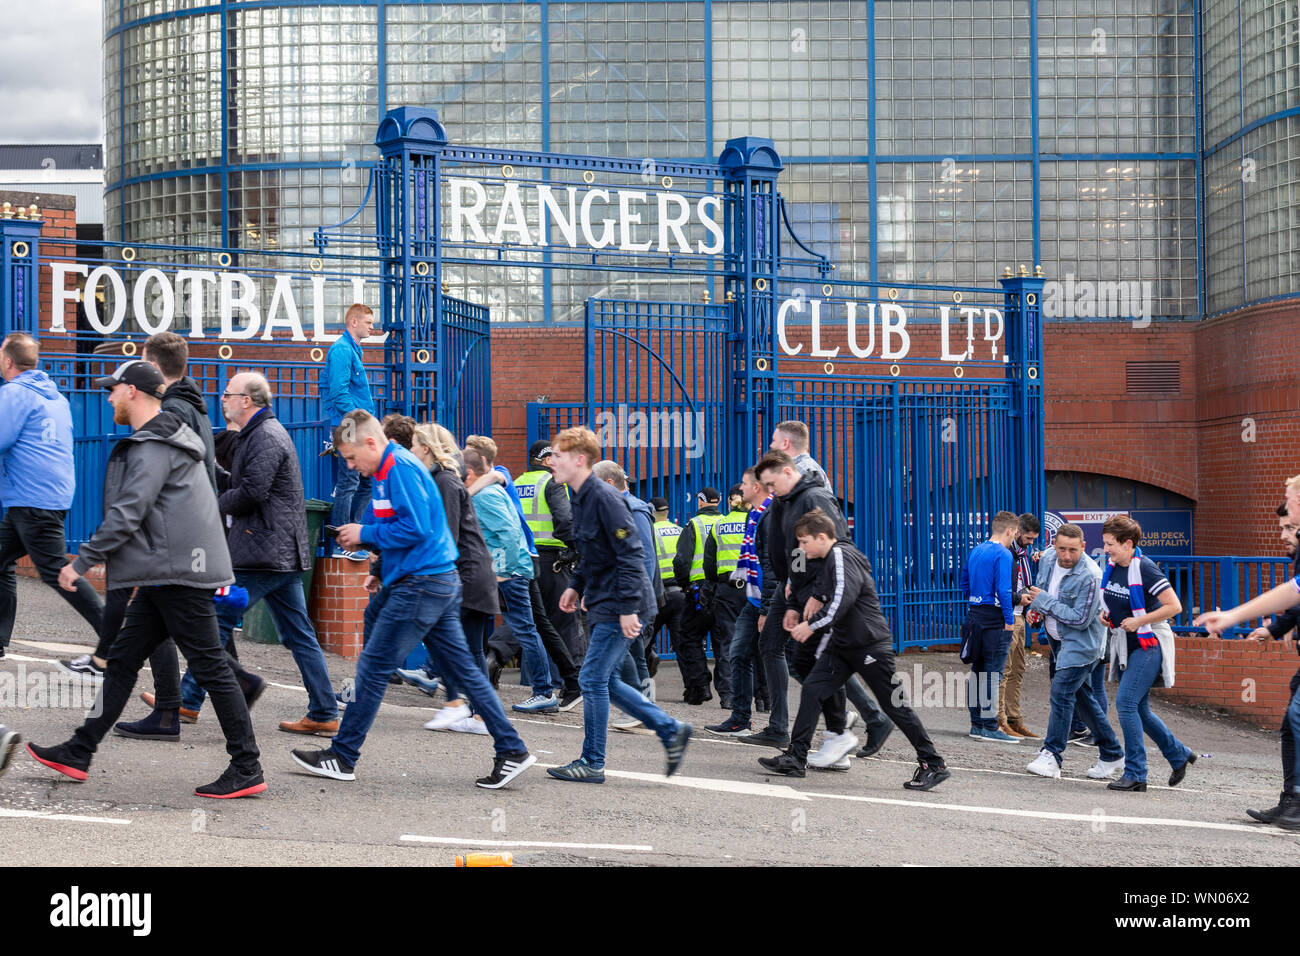 Rangers fans arriving at Ibrox Football Stadium for an Old Firm game with Glasgow Celtic on Sunday 1st September 2019 Stock Photo